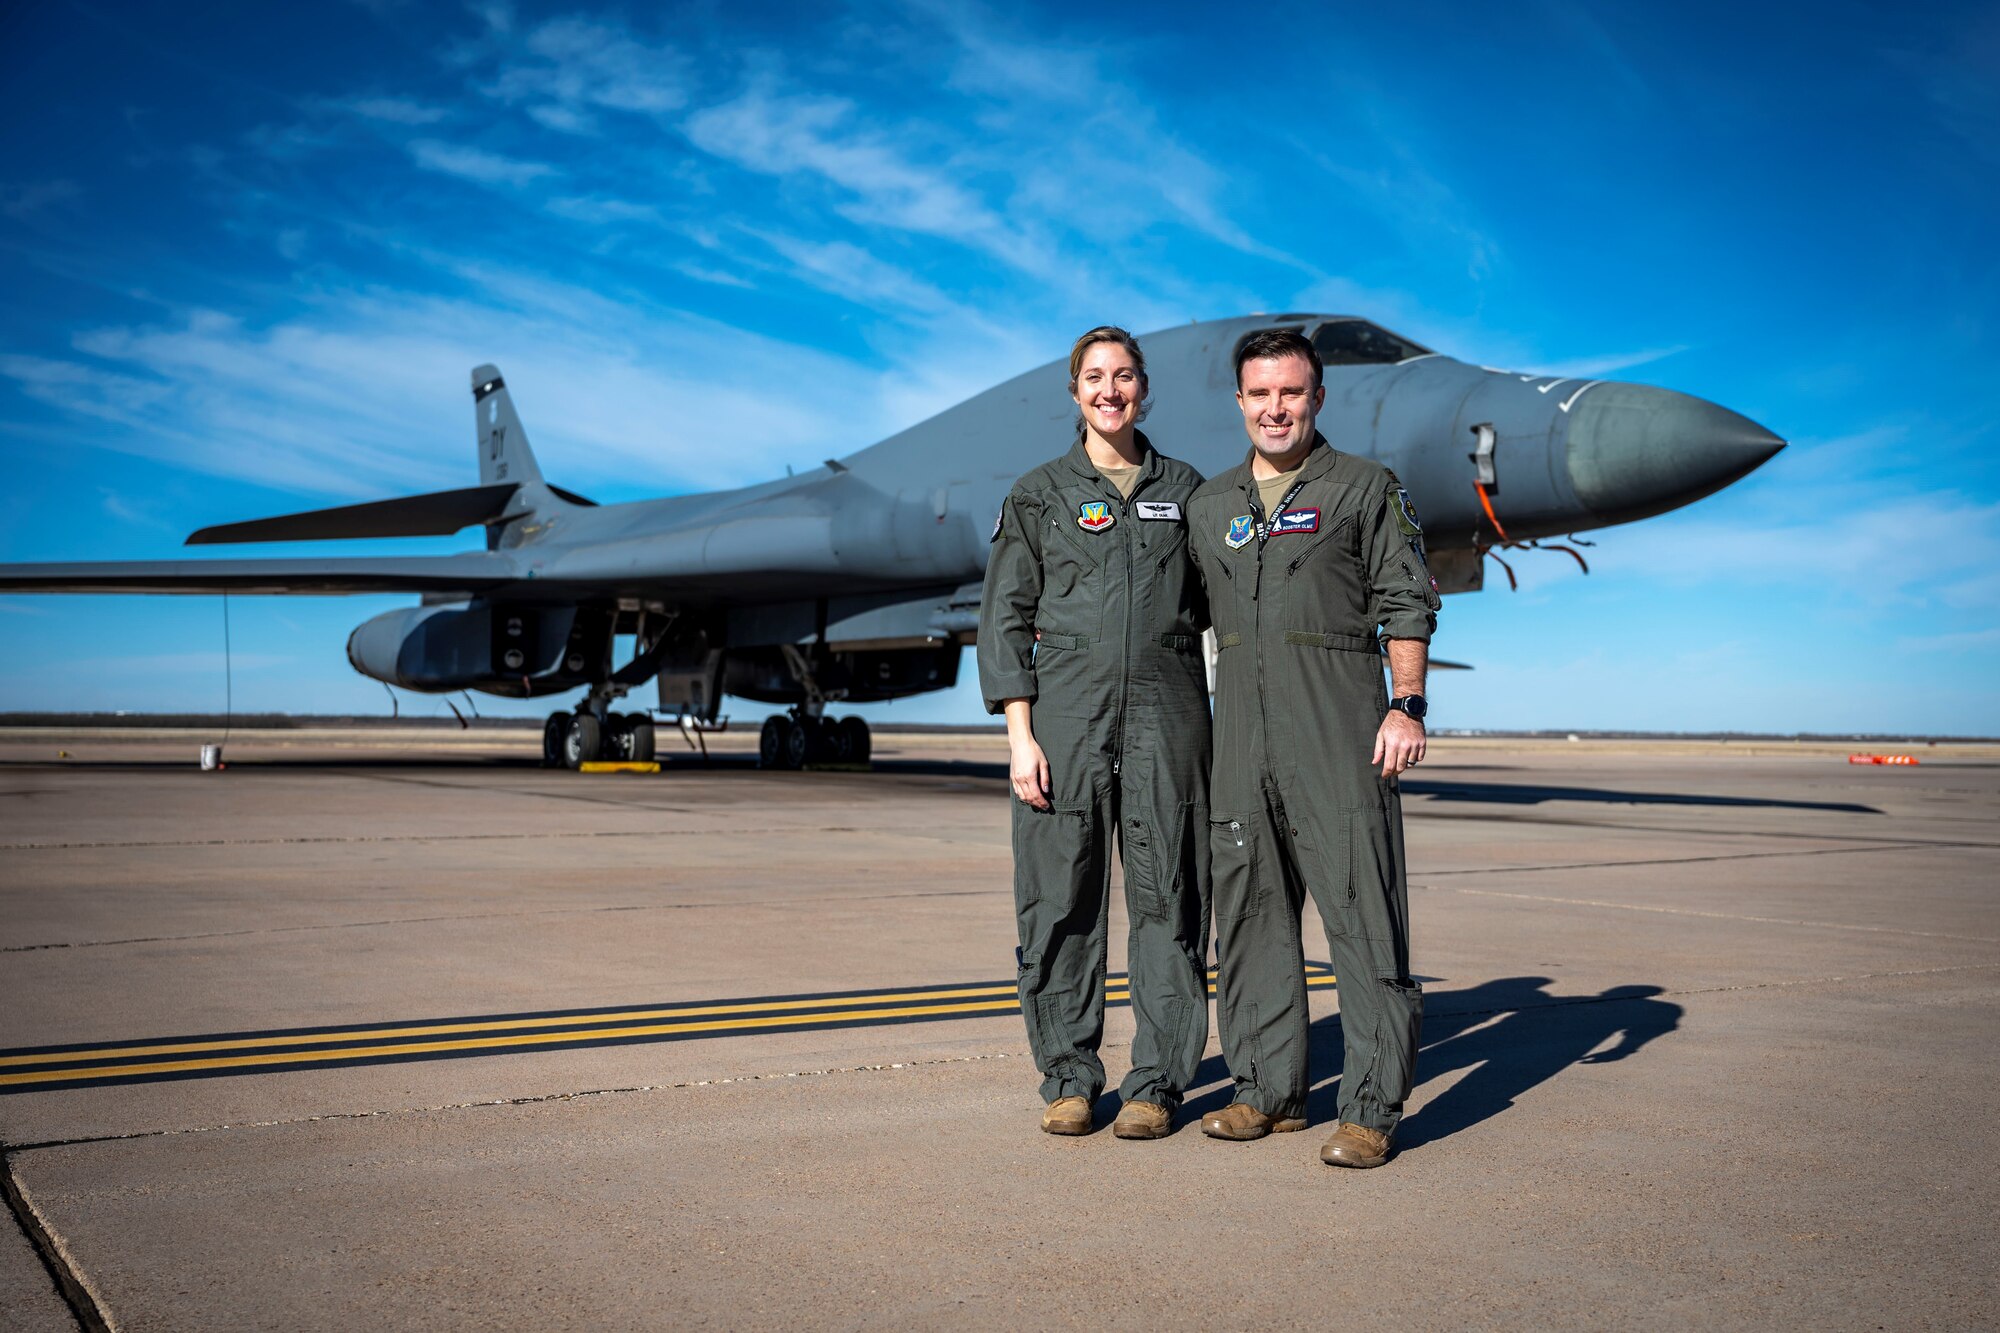 U.S. Air Force Maj. Lauren Olme, 77th Weapons Squadron assistant director of operations, and her husband, Maj. Mark Olme, 7th Operations Support Squadron bomb wing weapons officer, pose for a photo next to a B-1B Lancer at Dyess Air Force Base, Texas, Jan. 24, 2023. Lauren, who is currently pregnant, can continue flying after recently getting approved under the Air Force’s new guidance which allows female aircrew members to voluntarily request to fly during pregnancy. No waiver is required to fly in the second trimester with an uncomplicated pregnancy in a non-ejection seat aircraft if all flight safety criteria are met. All pregnant aircrew members are also authorized to apply for a waiver regardless of trimester, aircraft or flight profile. (U.S. Air Force photo by Senior Airman Leon Redfern)